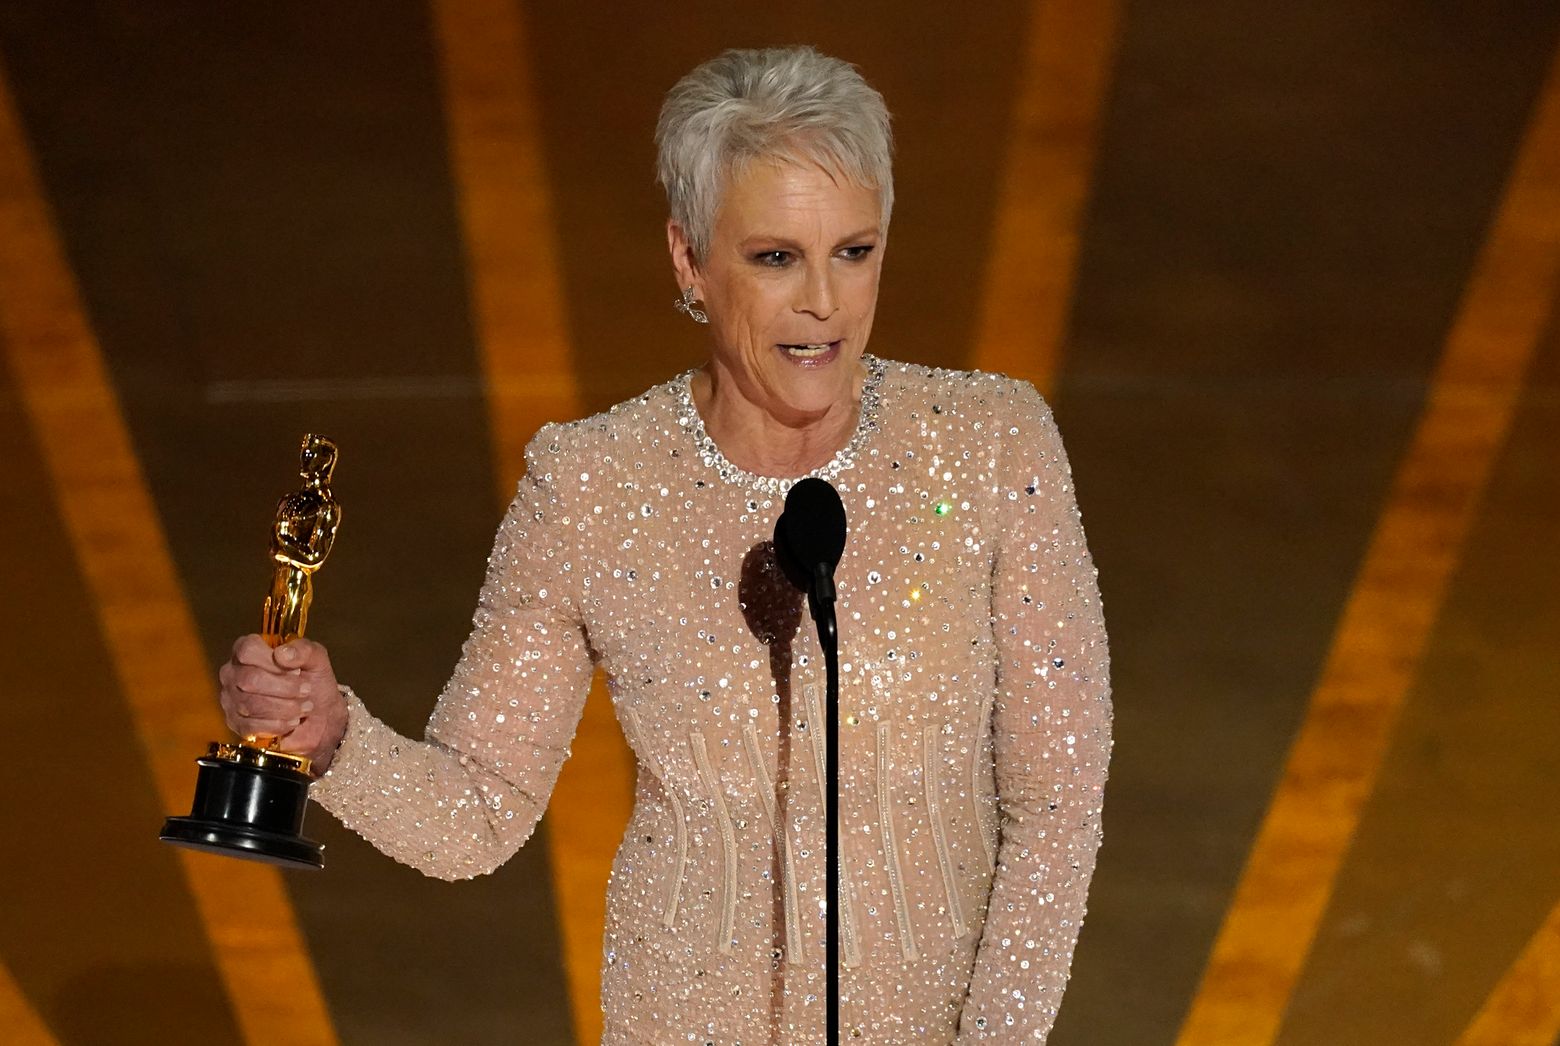 Jamie Lee Curtis wins Oscar for best supporting actress | The Seattle Times